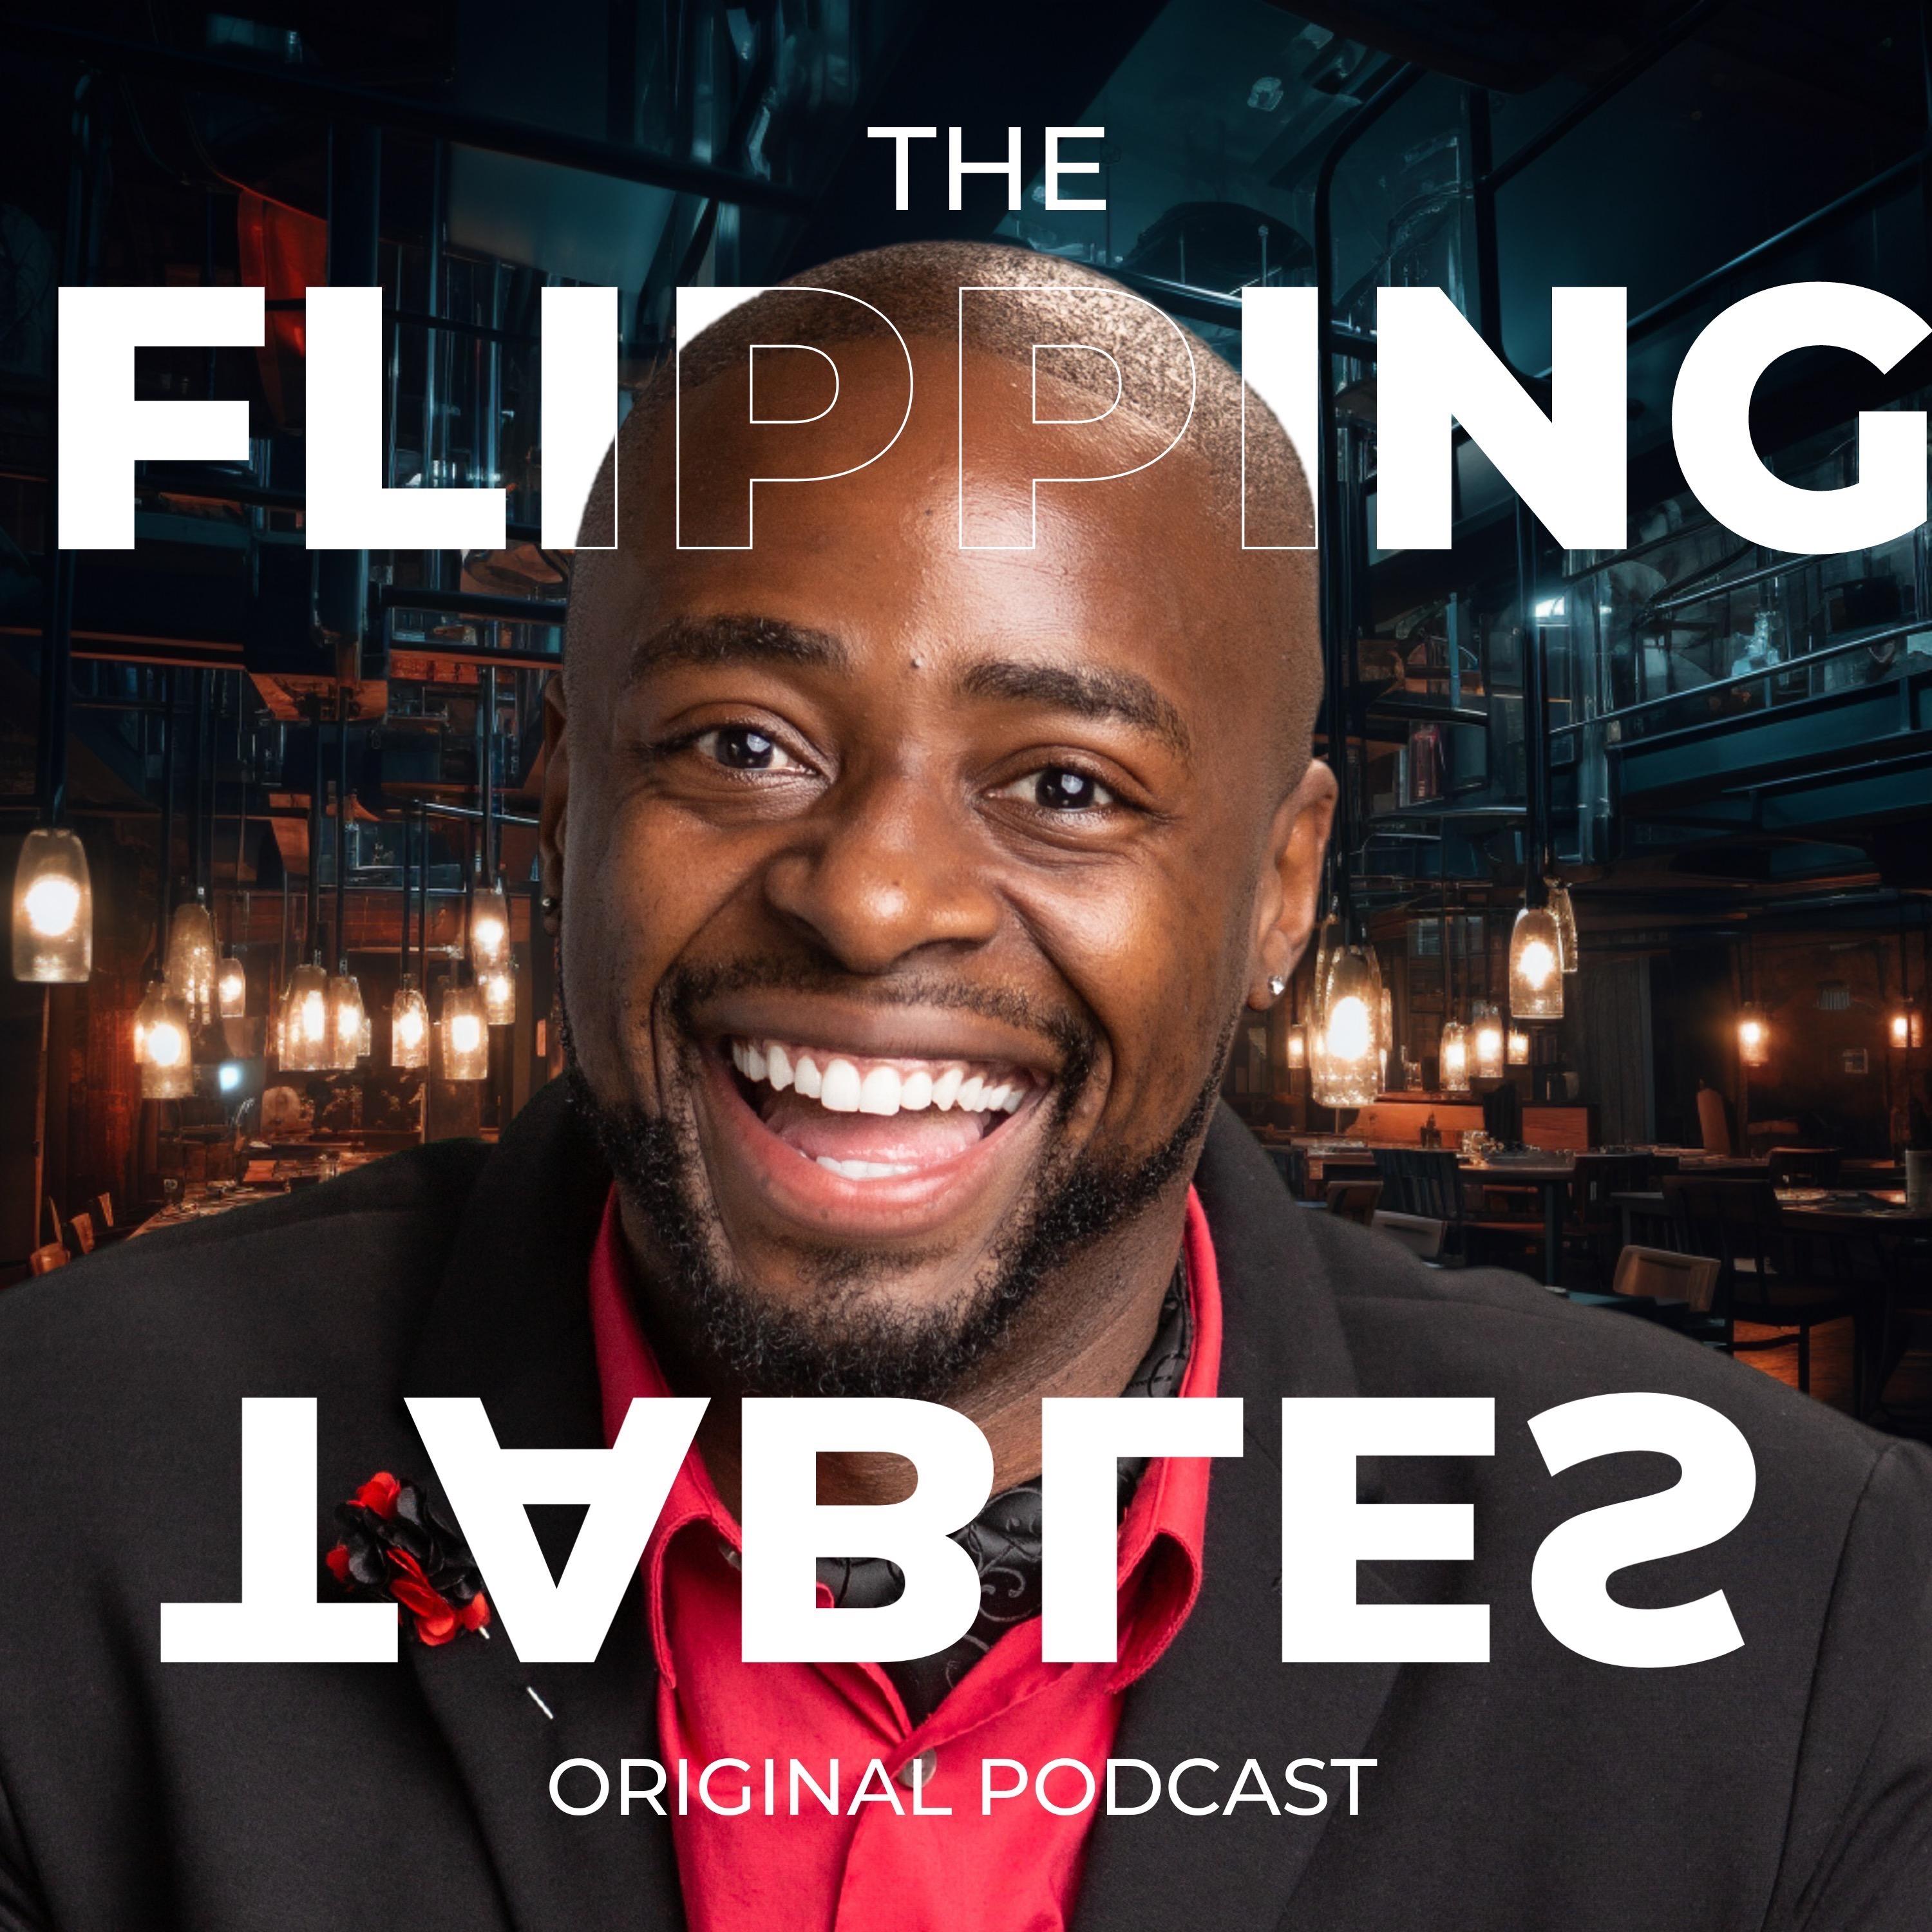 The Flipping Tables Podcast